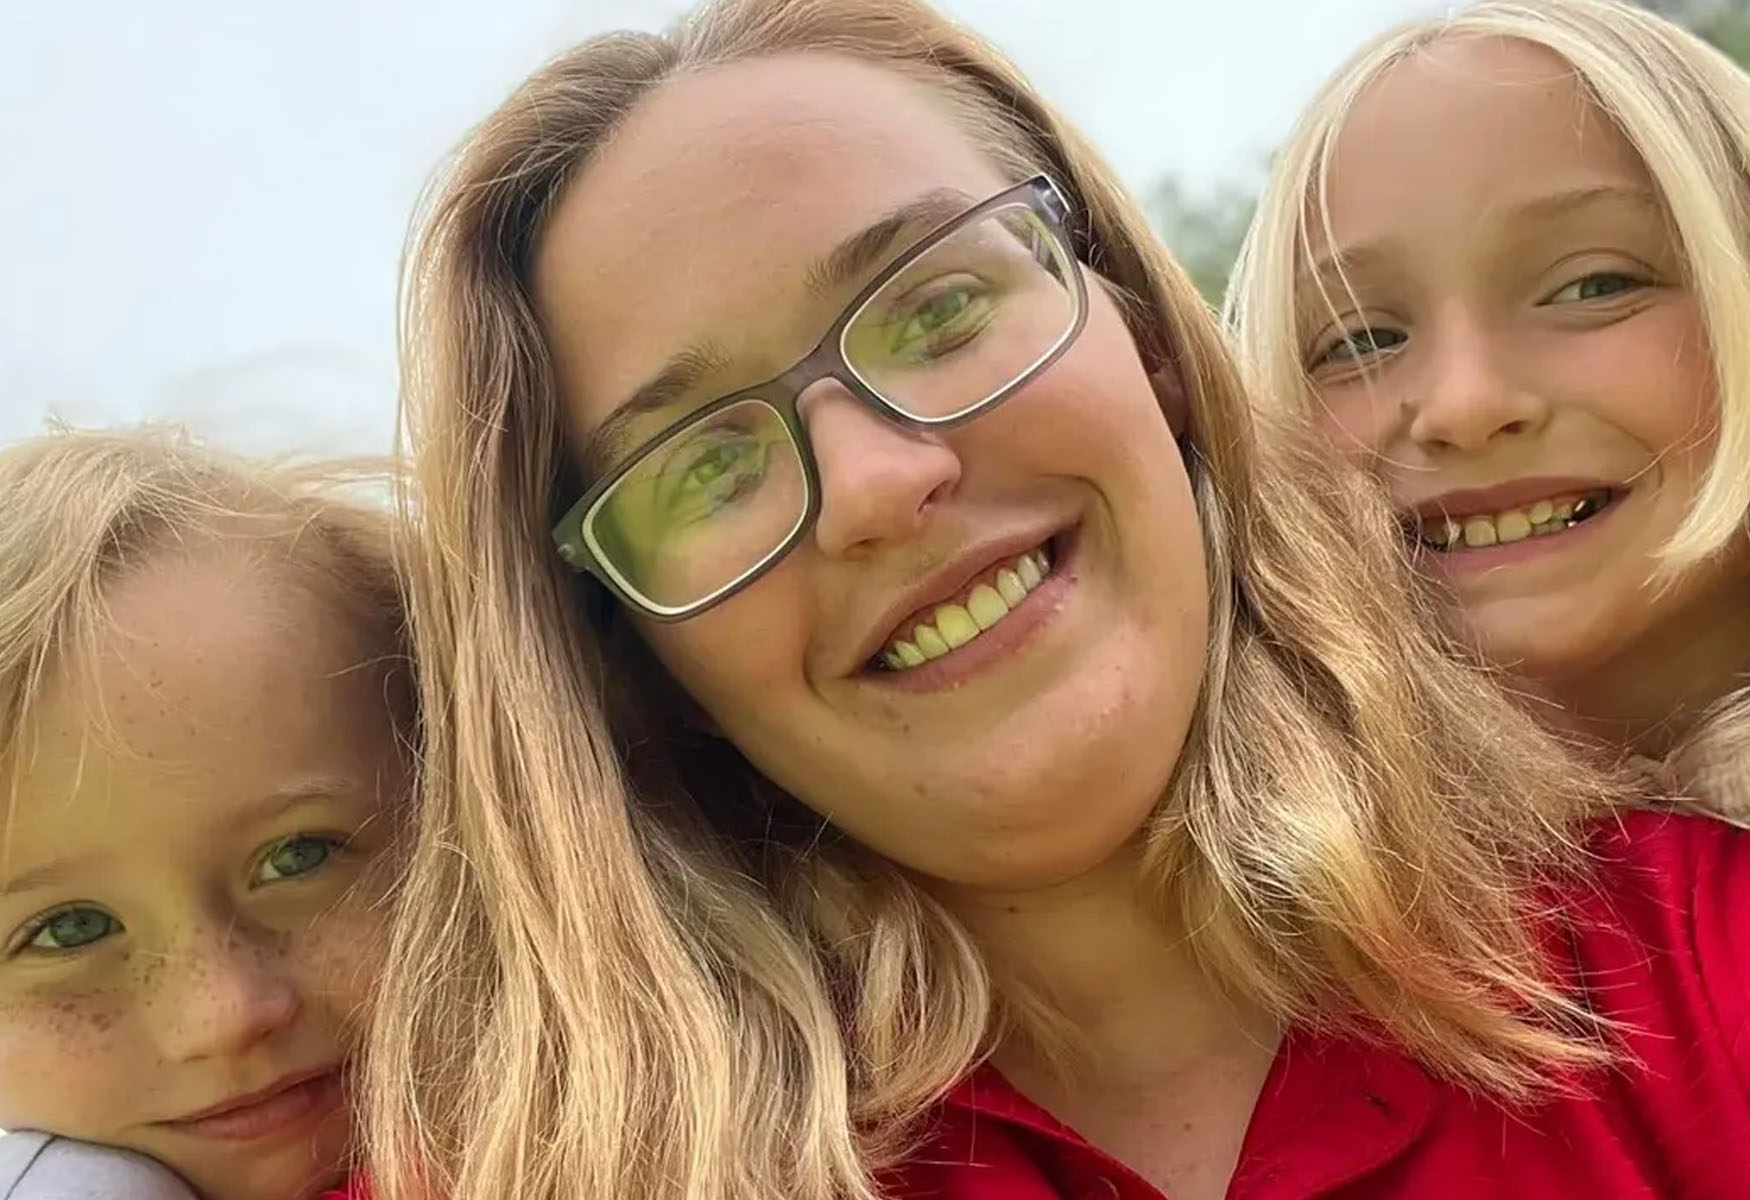 Anna “Chickadee” Cardwell’s Cancer Battle Documented On Mama June’s Show